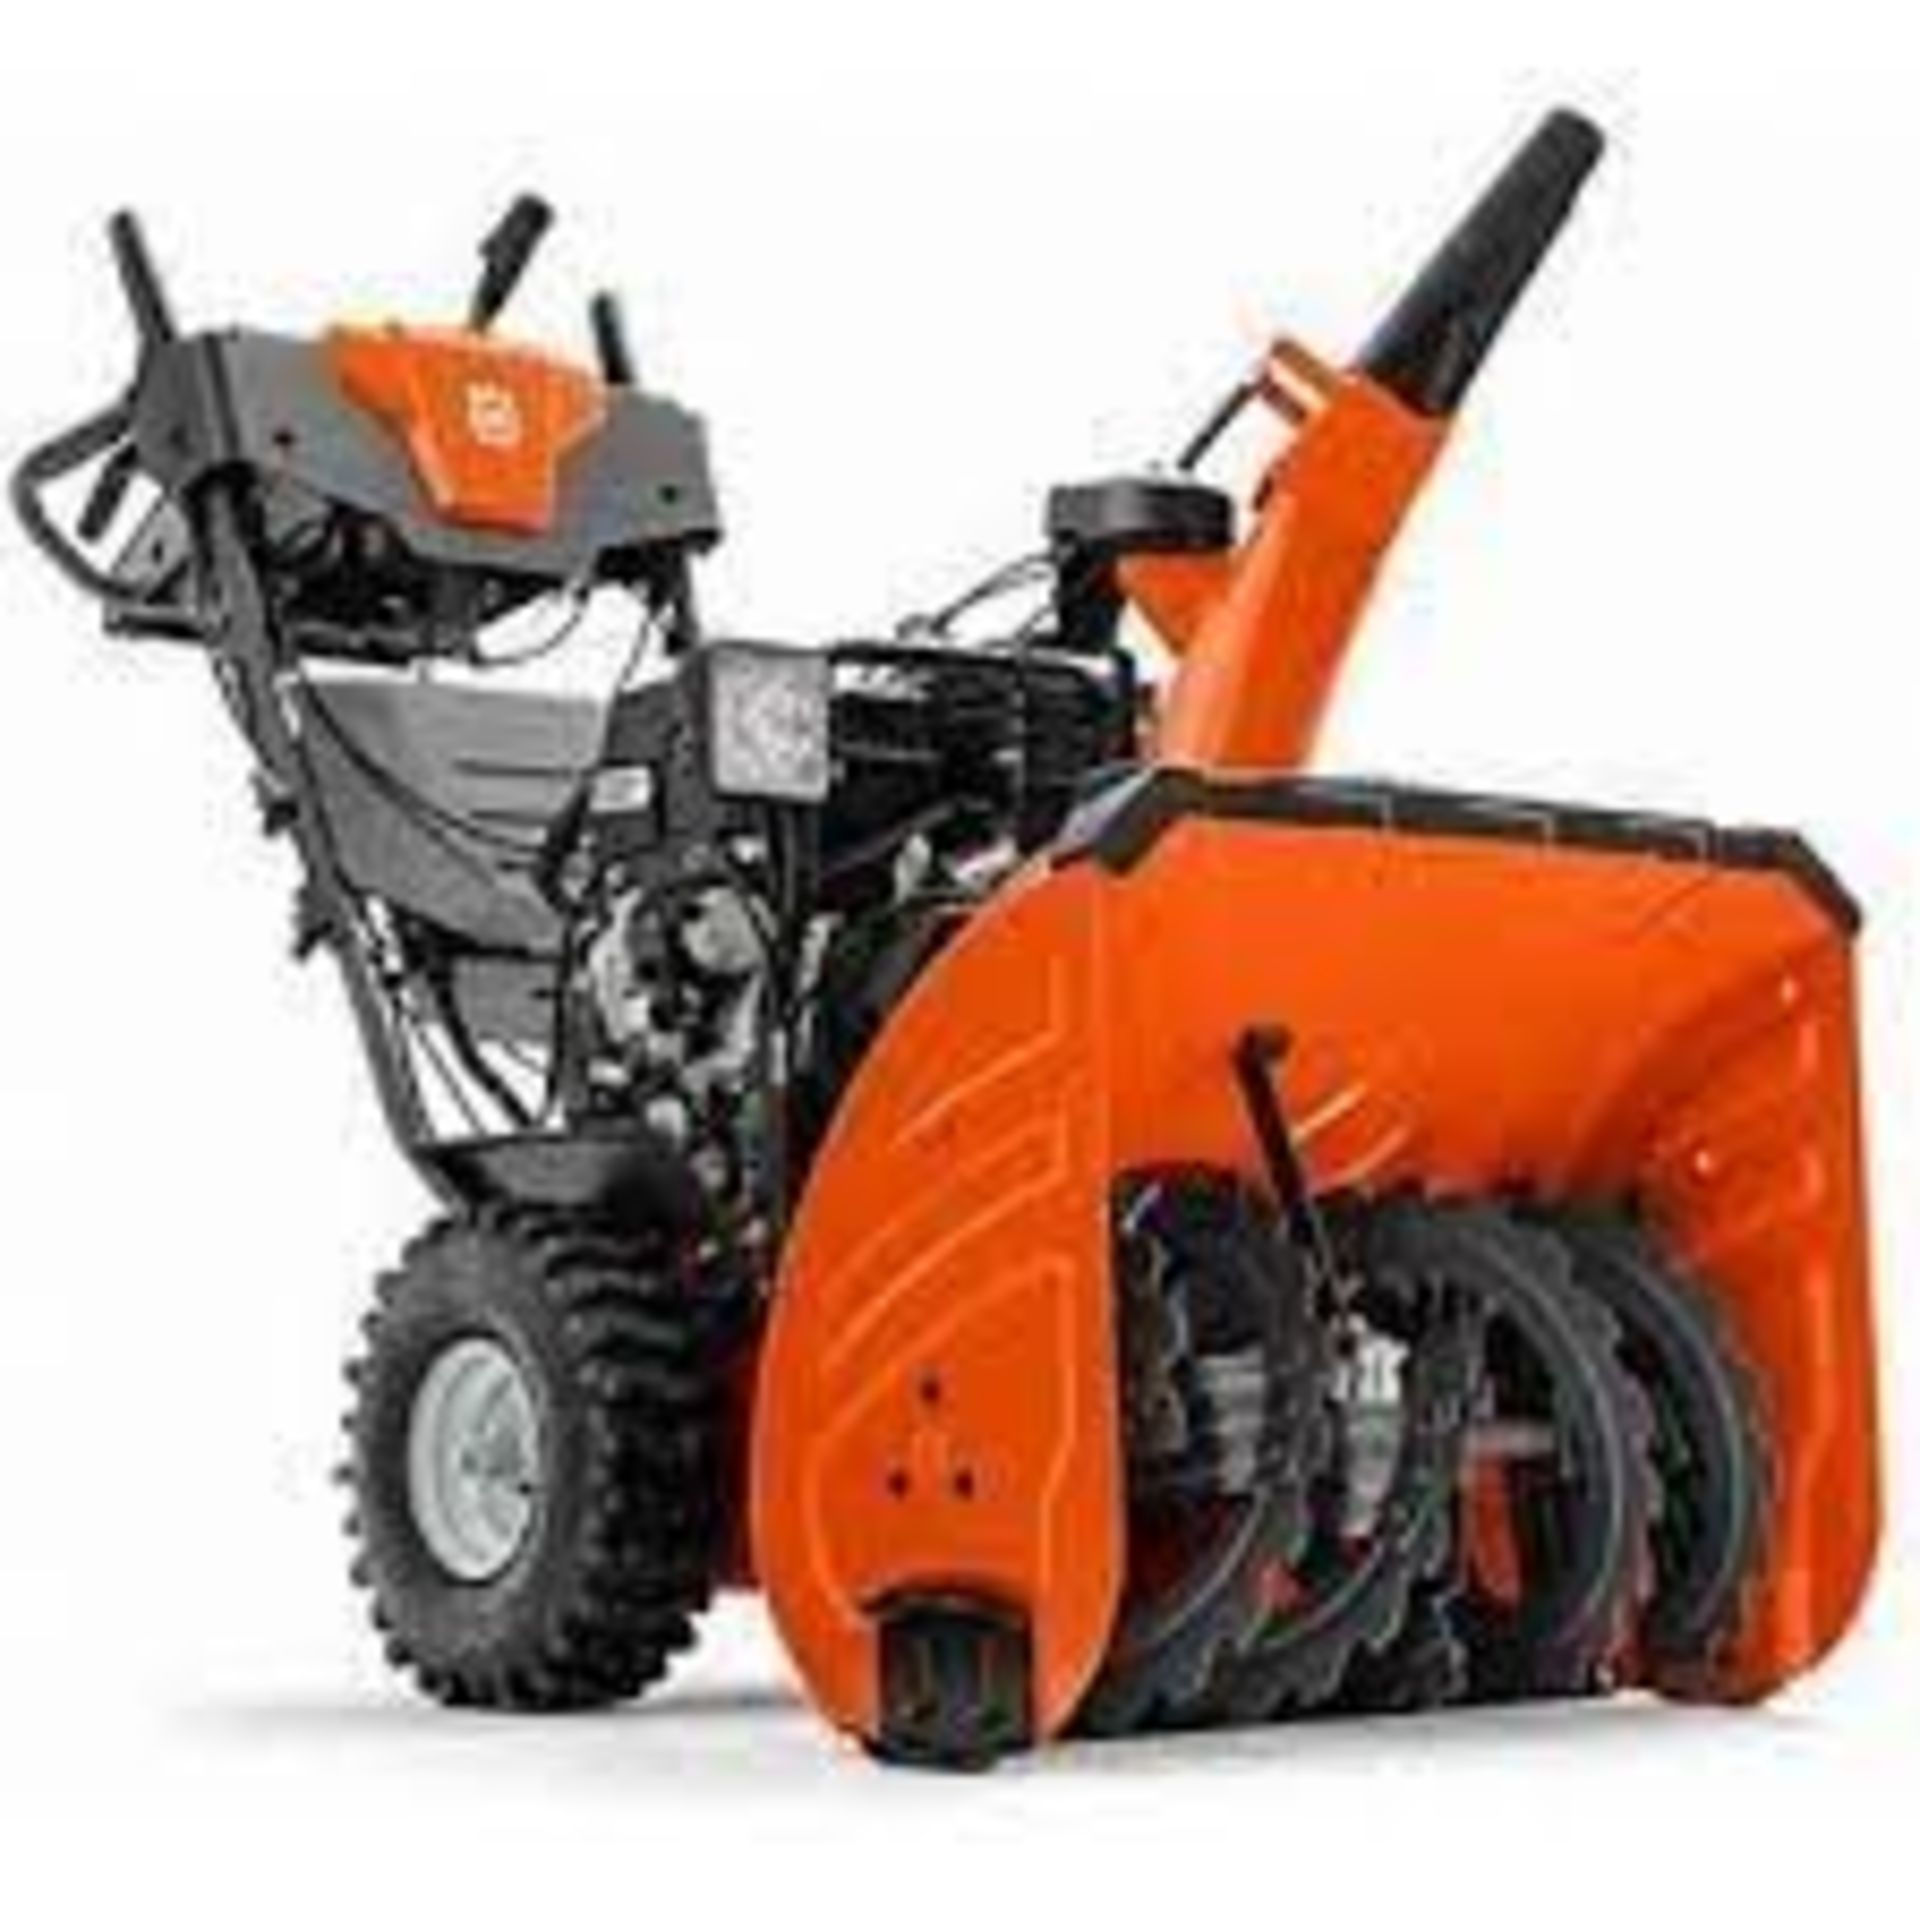 Husqvarna ST 327 Self Propelled Snow Blower - Approx. MSRP $1399 - Image 2 of 4